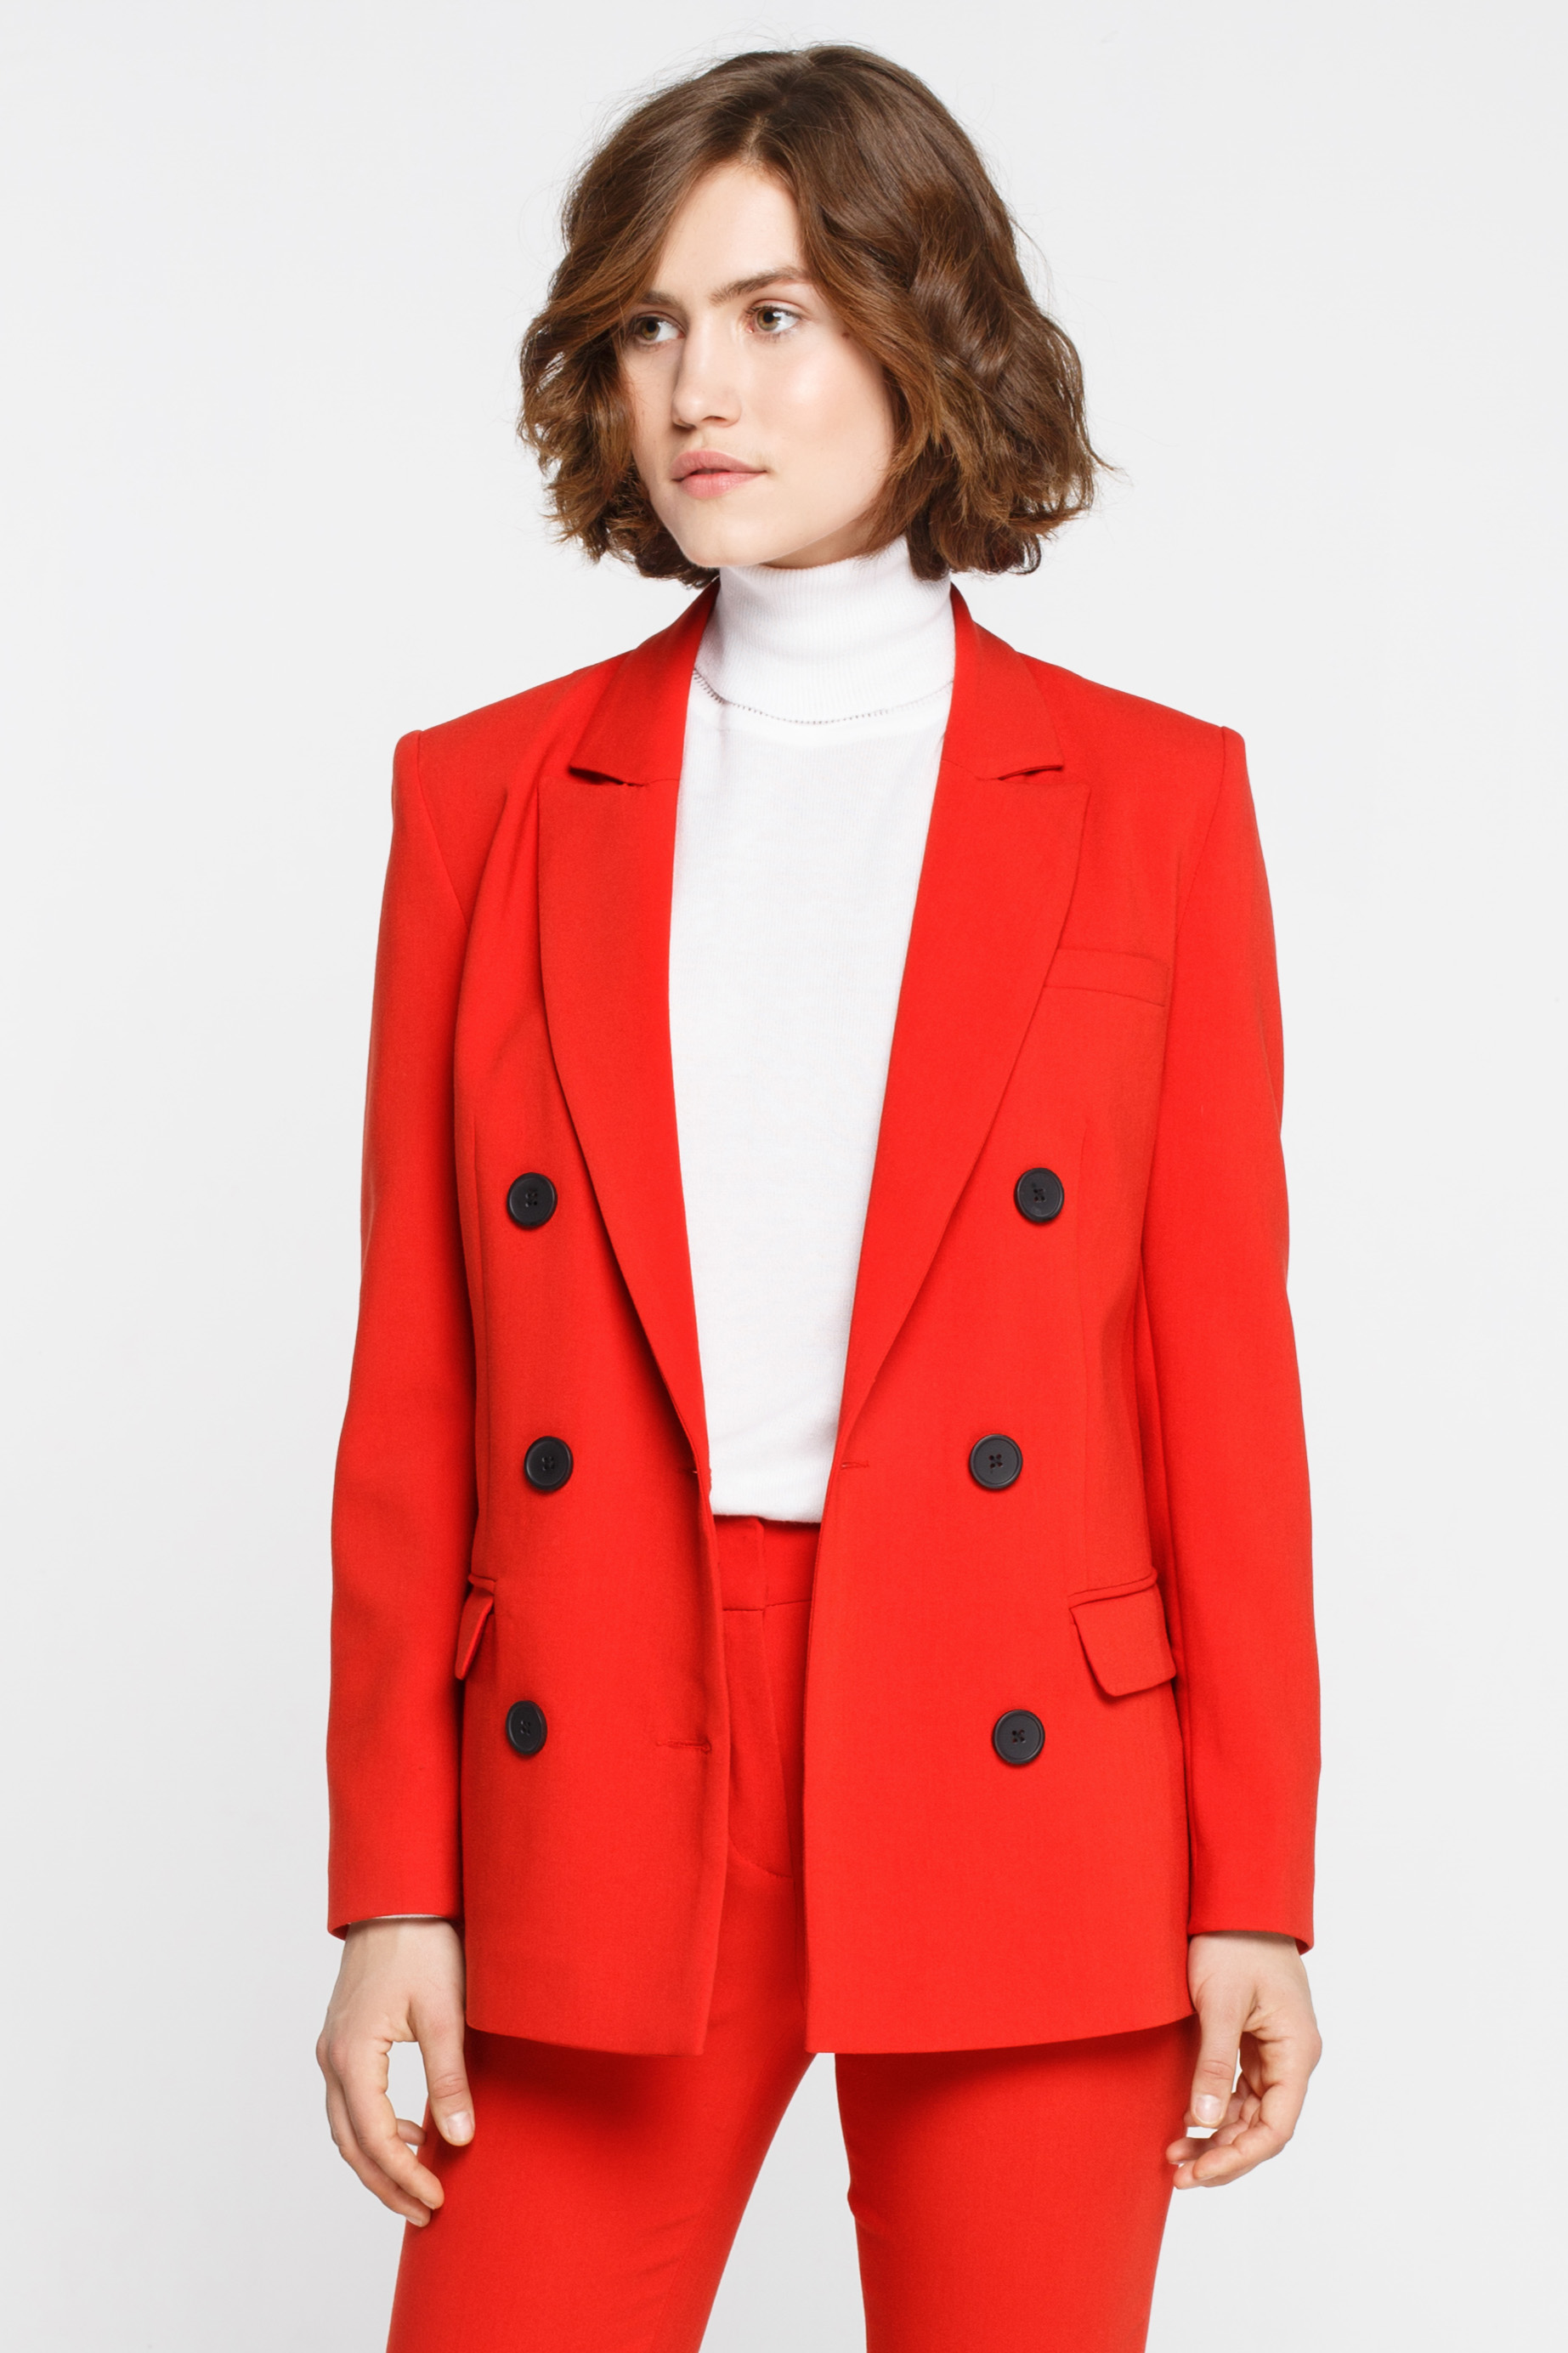 Red double breasted jacket, photo 1